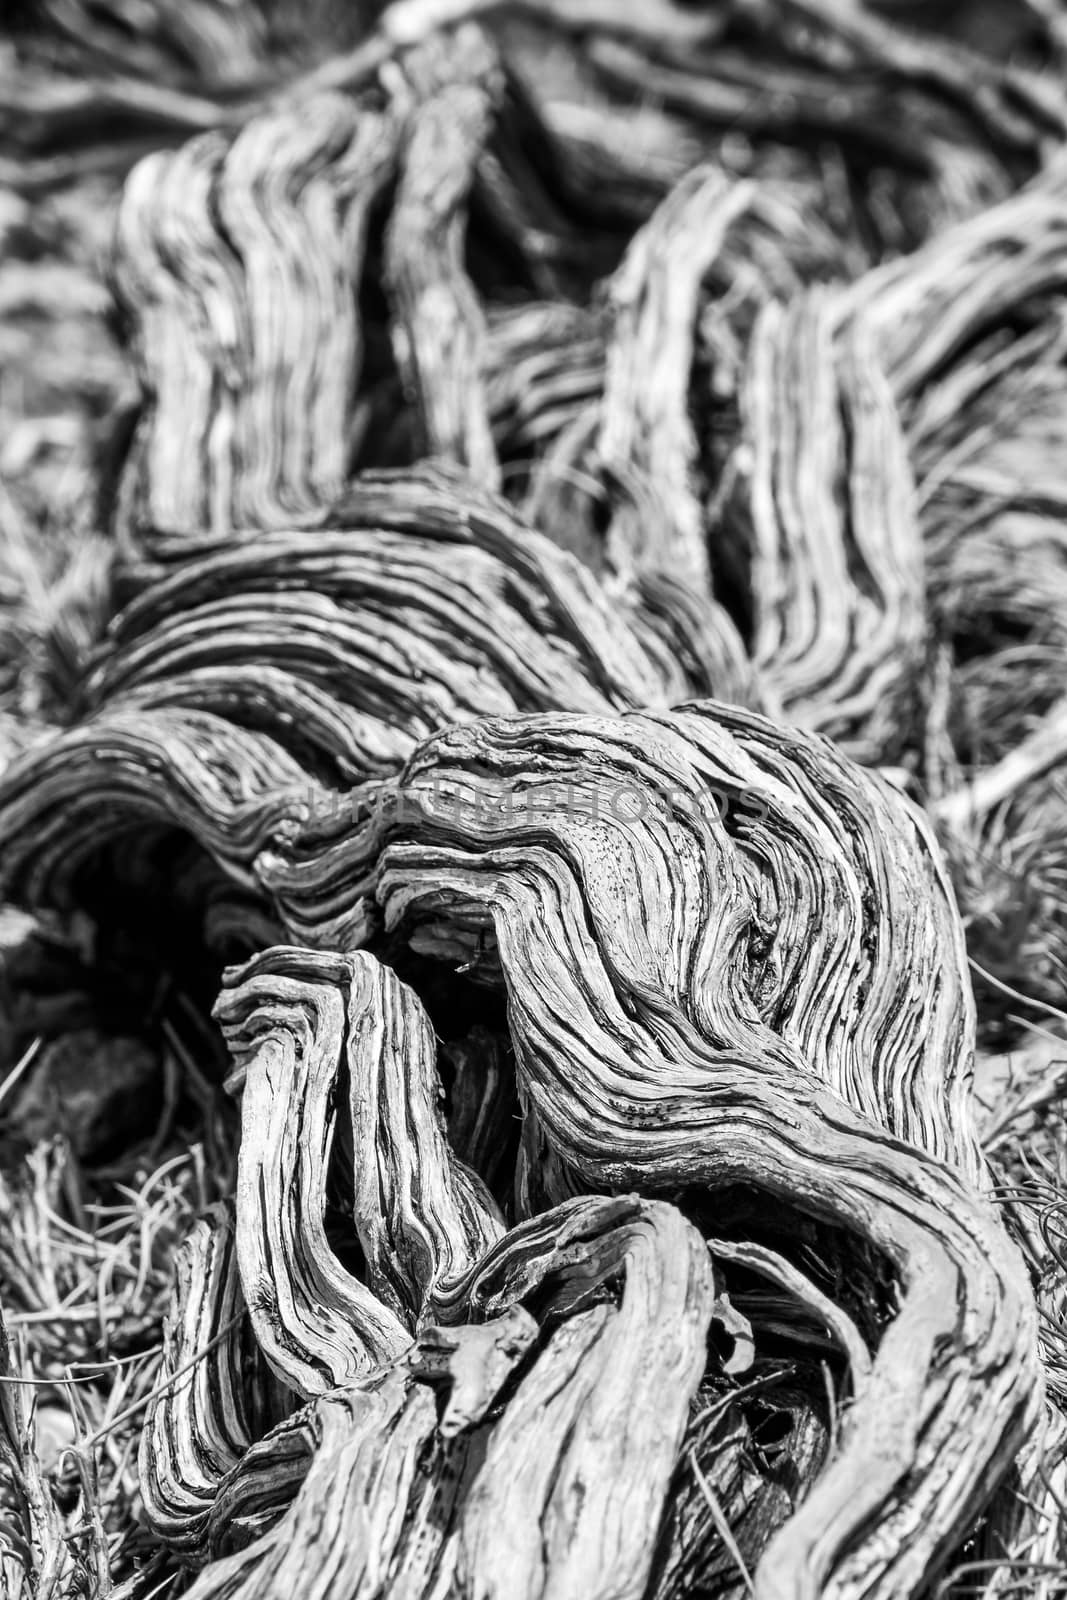 Twisted nearly dead old dry tree stem in black and white at Yardie Creek Cape Range National Park Australia